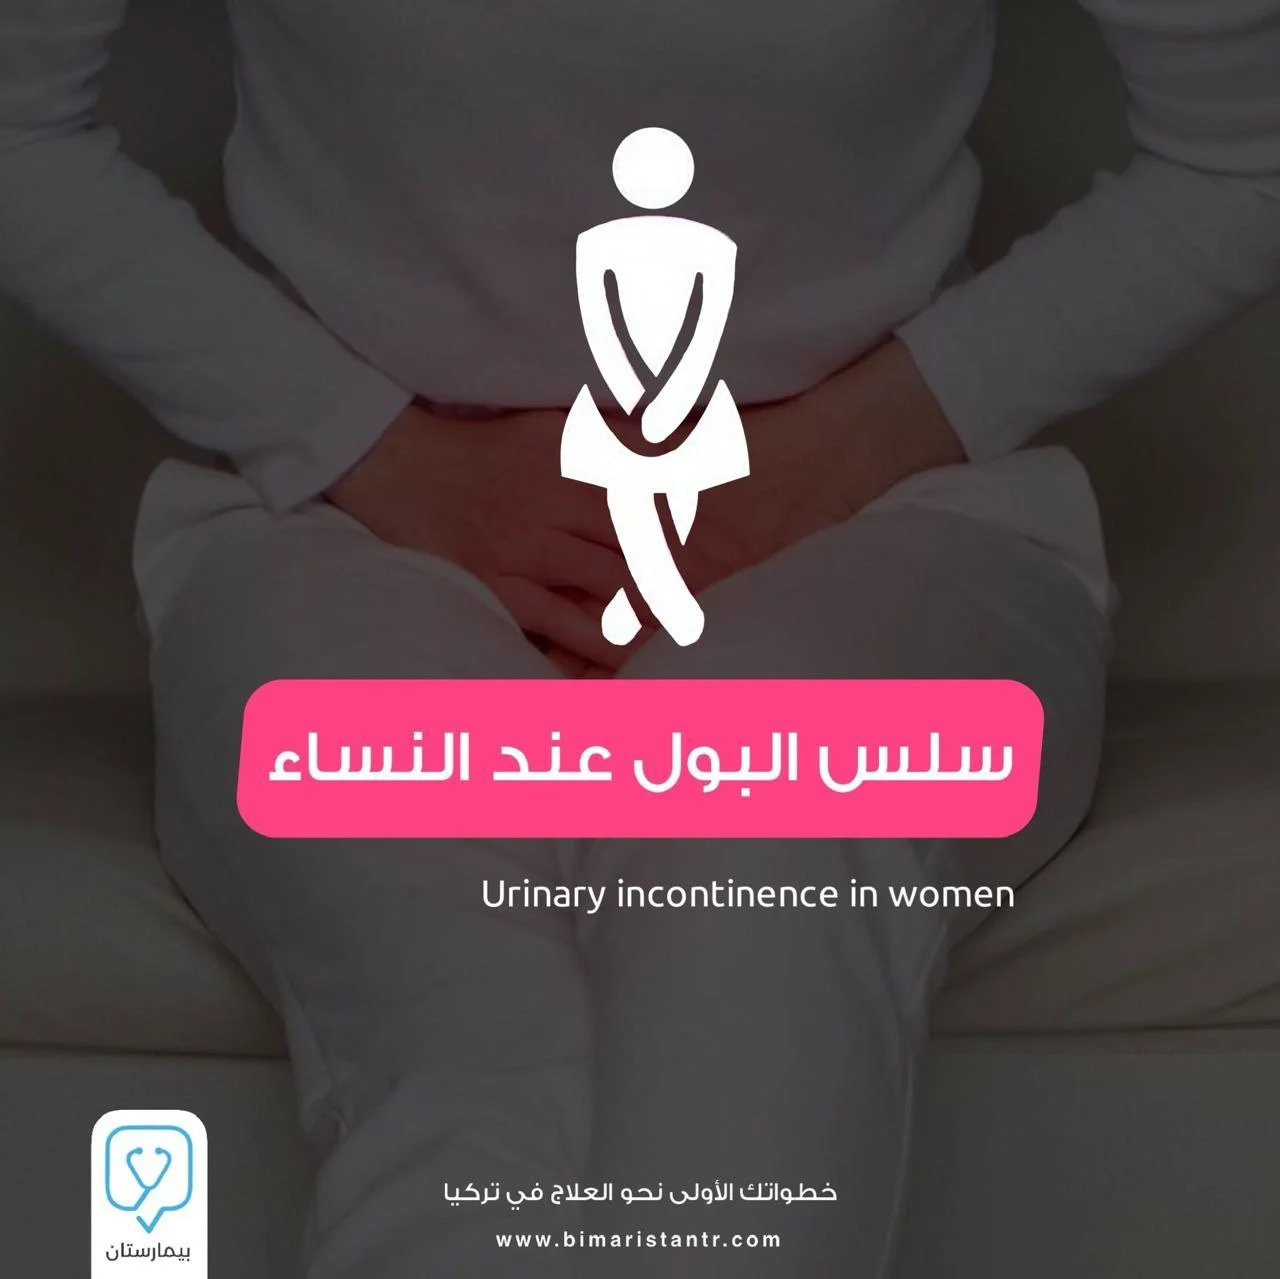 Treatment-urinary-incontinence-when-women-causes-and-prevention methods